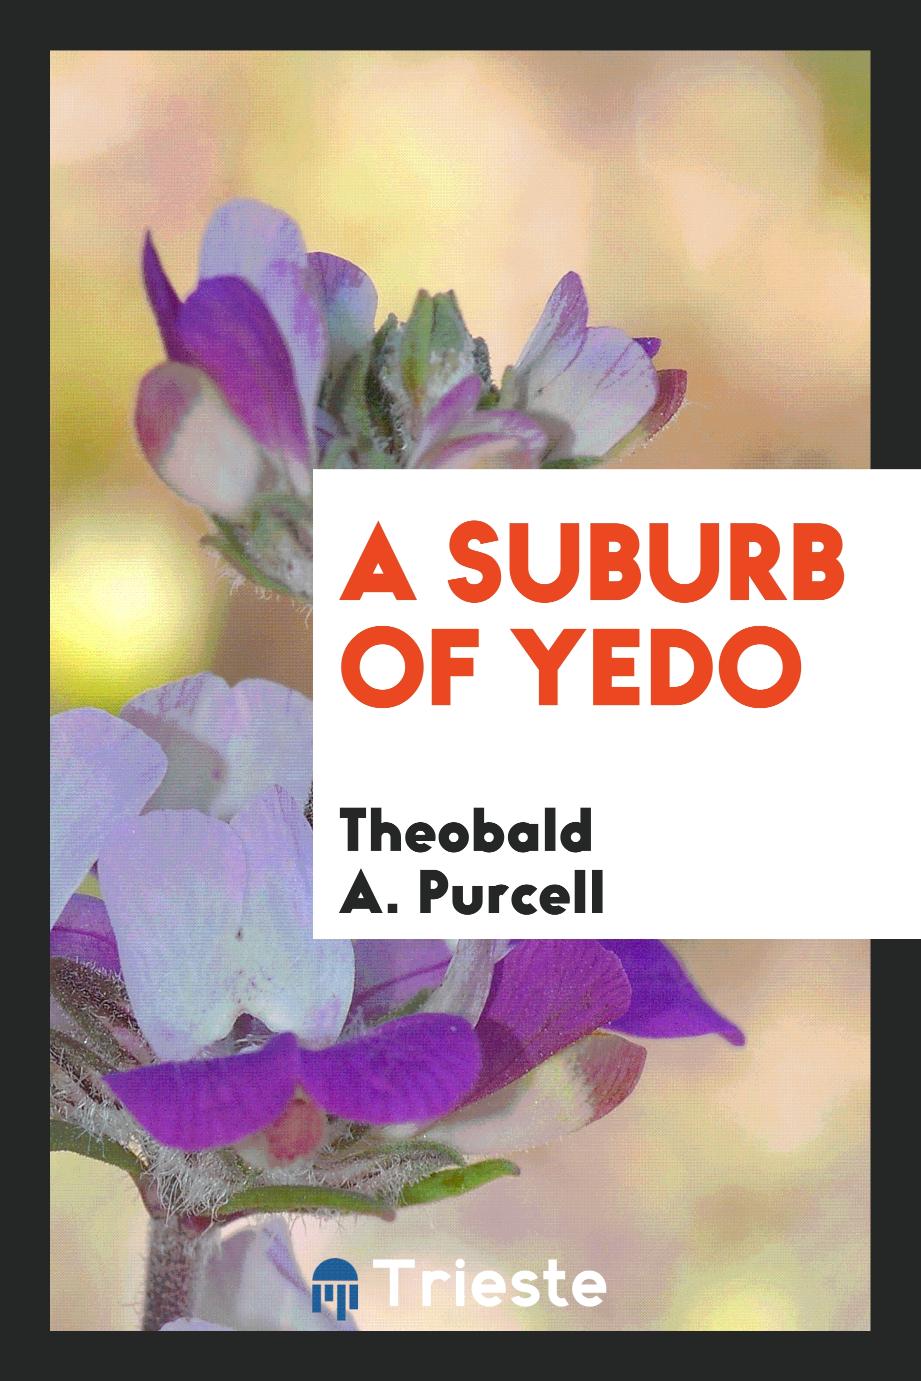 A Suburb of Yedo